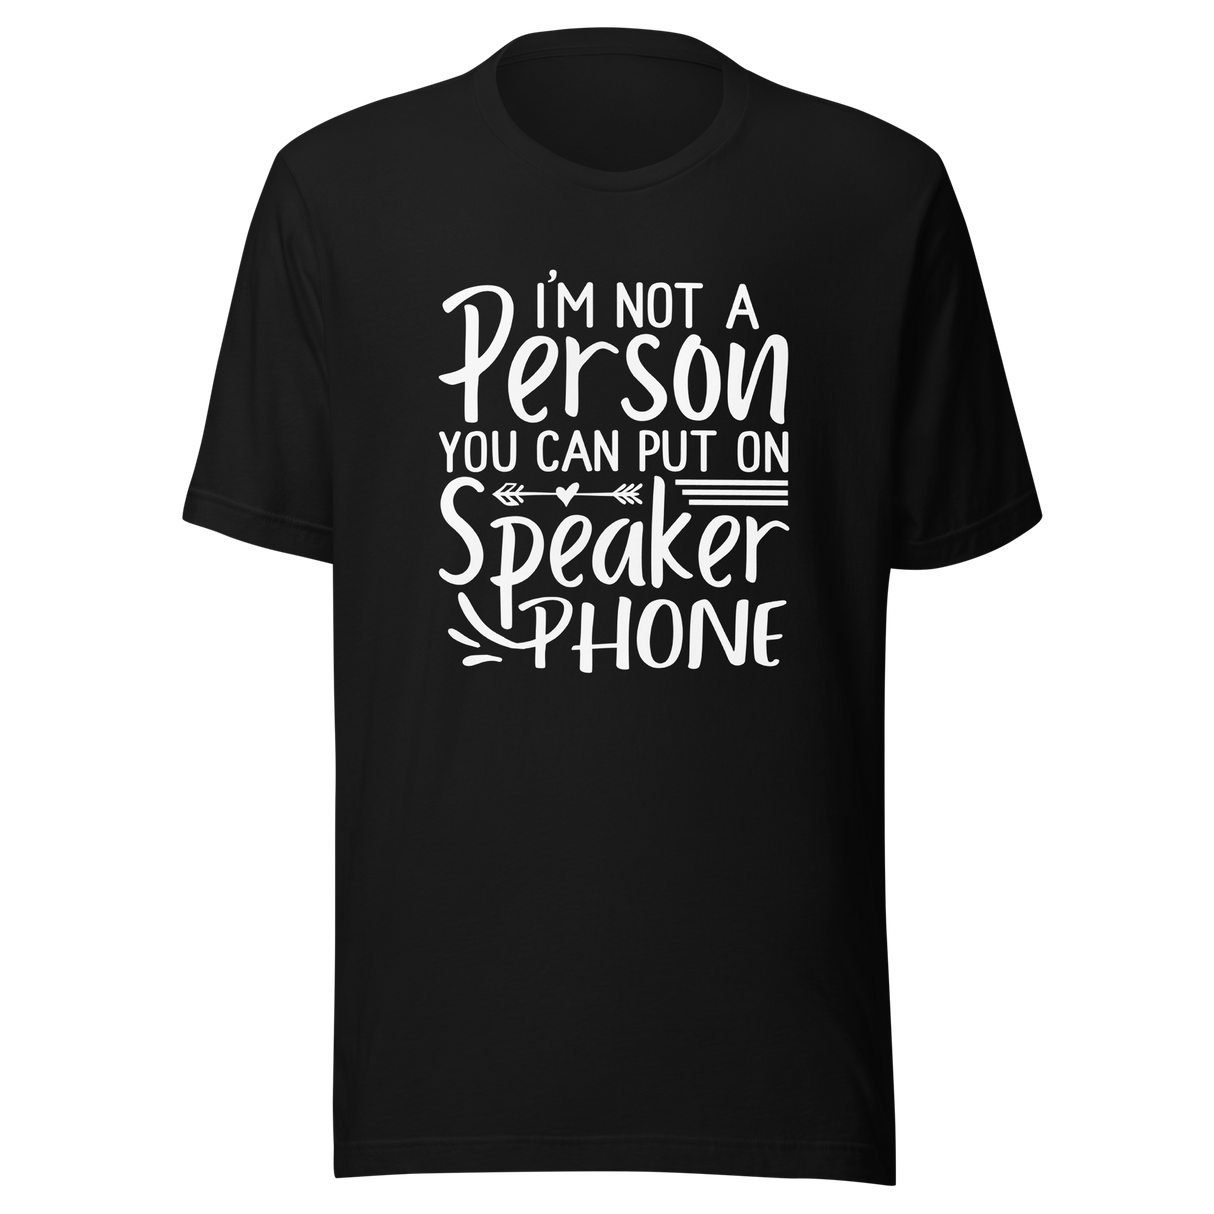 im-not-a-person-you-can-put-on-speaker-phone-speaker-phone-tee-not-a-person-t-shirt-clever-tee-t-shirt-tee#color_black